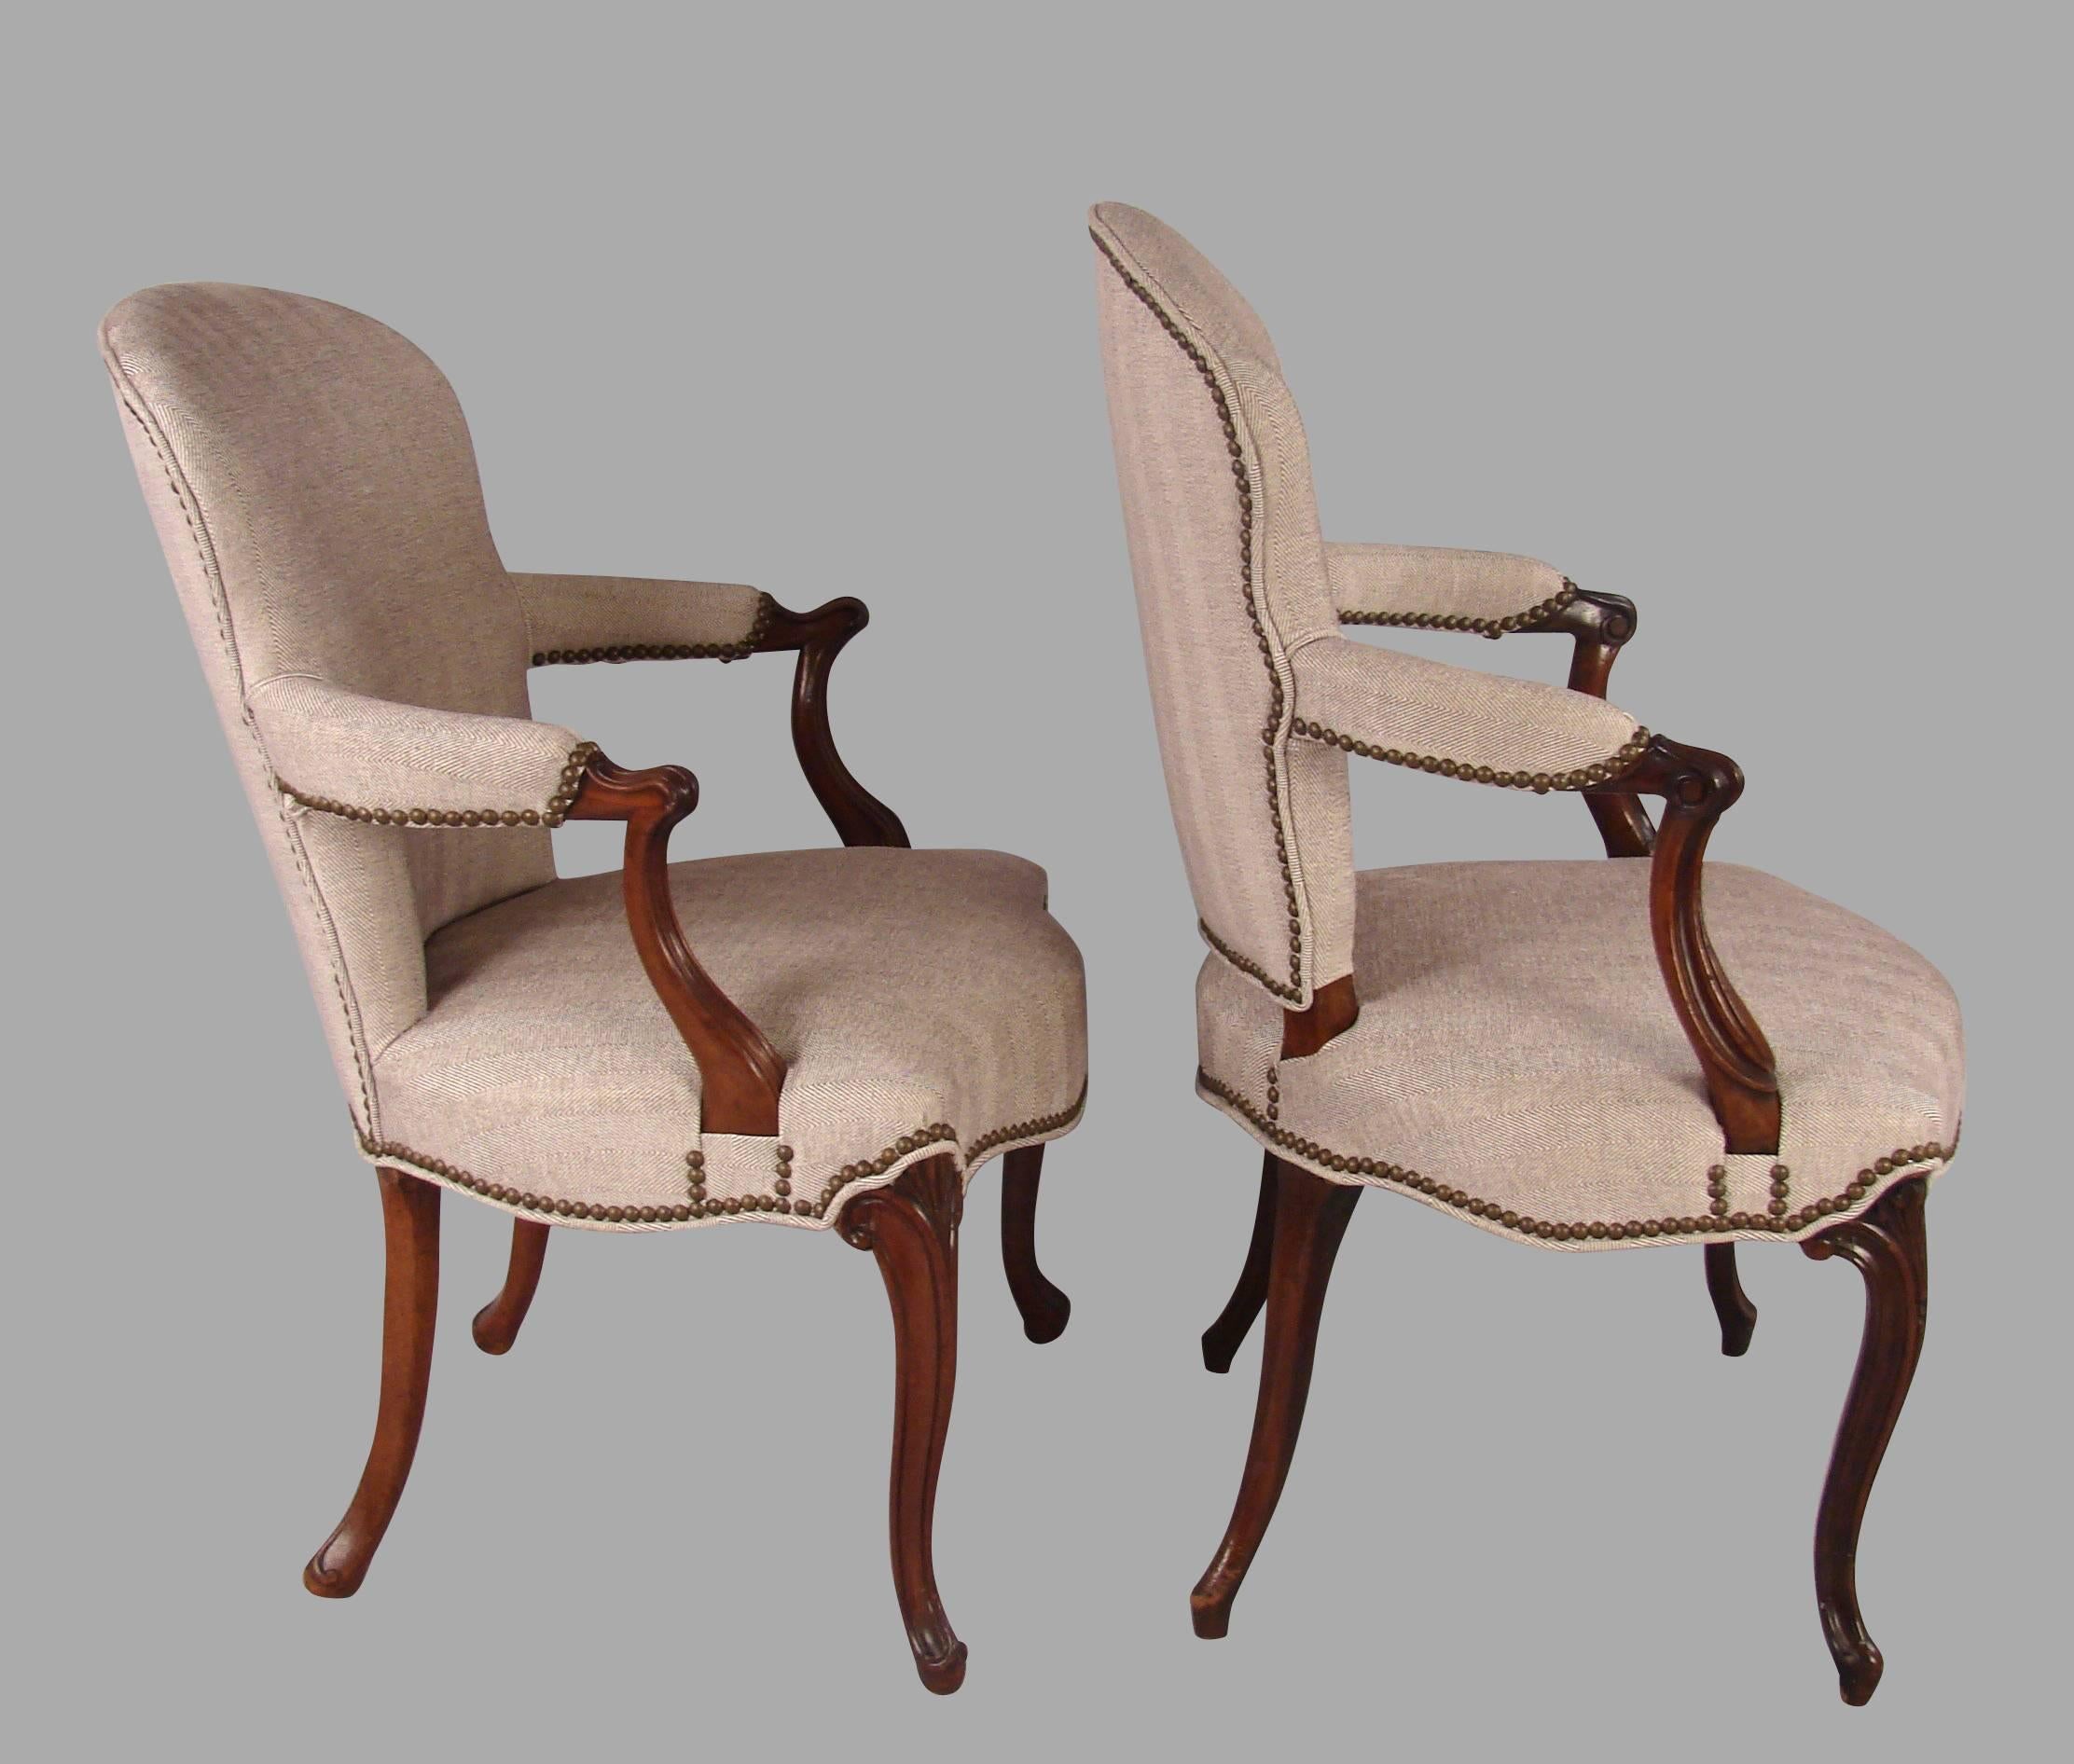 English Two Similar Mahogany Georgian Style Armchairs in the French Hepplewhite Taste